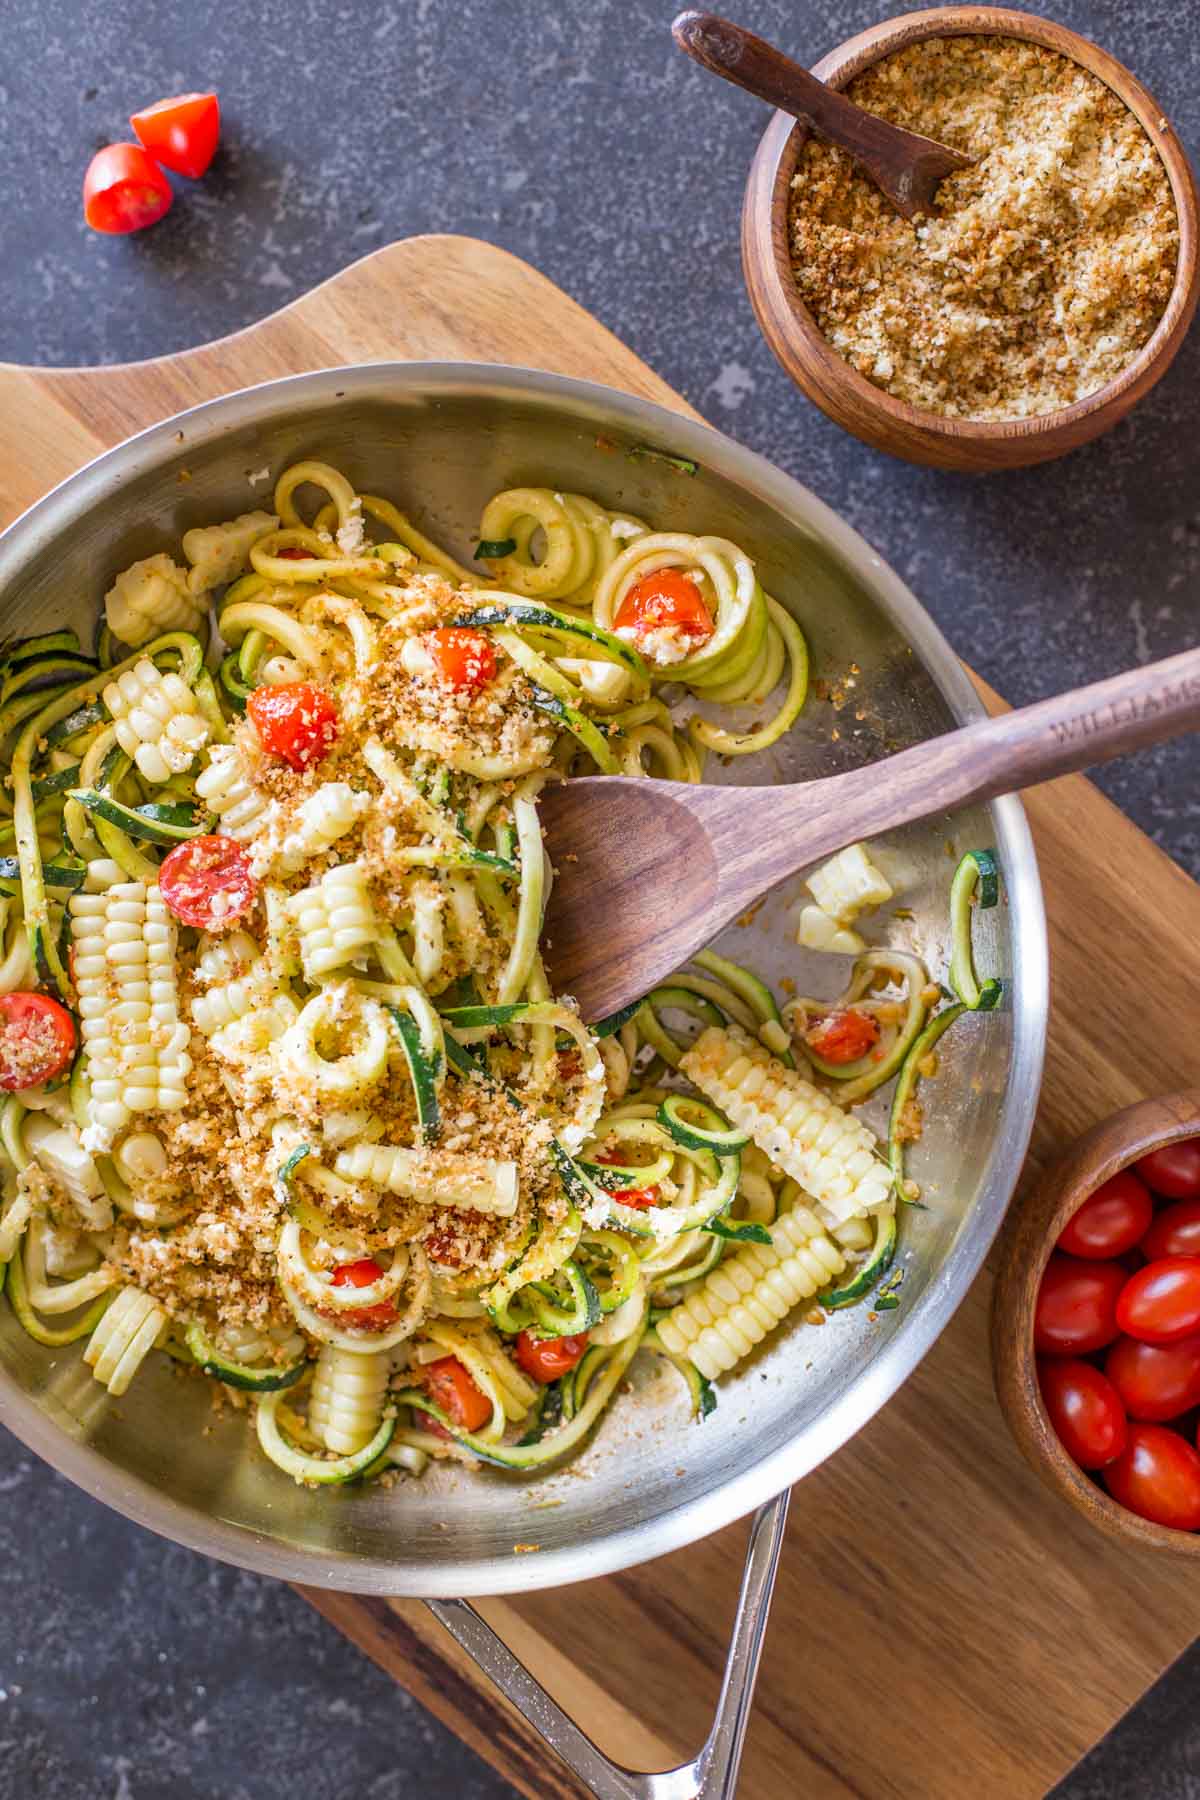 Sweet corn cut off the cob, red ripe tomatoes, and zucchini are the stars in my latest obsession. Topped with creamy feta and toasted Panko, this dish offers the best of the best!